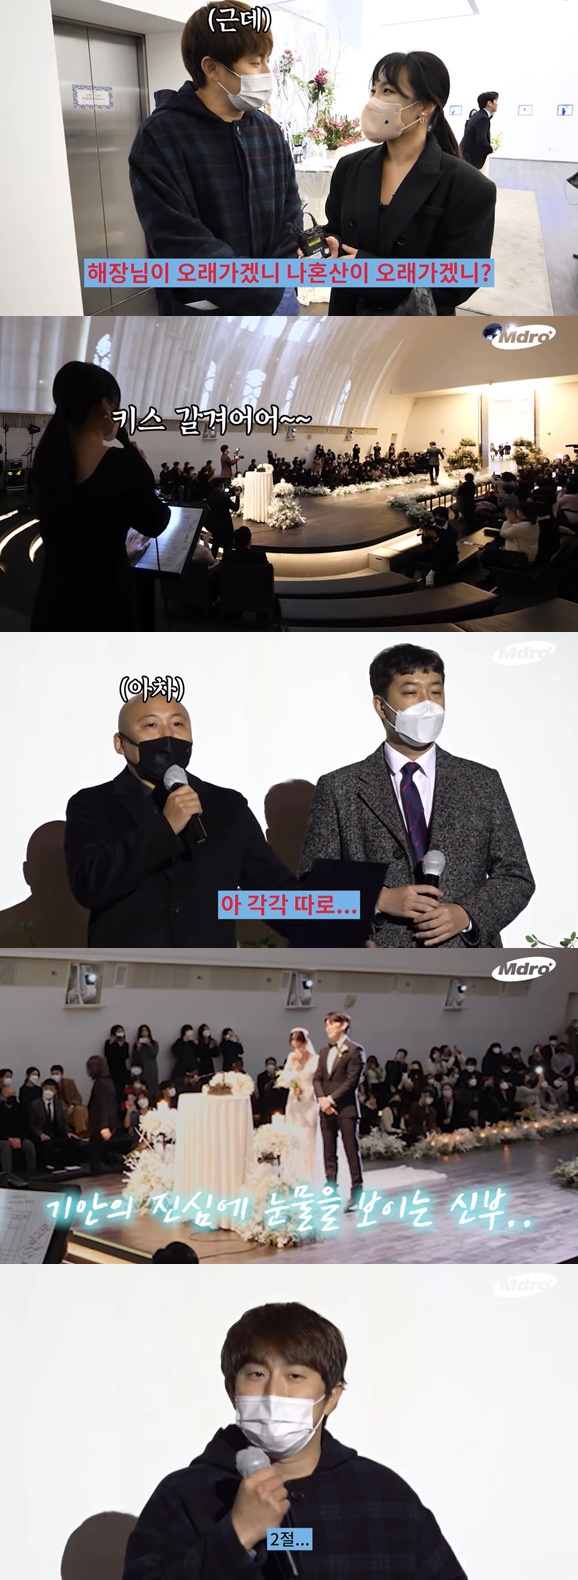 On the 18th, MBC web entertainment channel M Dromeda Studio posted a video titled Marriage is to be held to other people different from usual.The video was featured on the wedding scene of PD, who is in charge of the channel. The wedding ceremony was attended by the performers of the entertainment programs Mr.Comedian Lee Eun-ji, who hosted the wedding, met Kian84, who was pleased to see Lee Eun-ji, who is appearing together on I Live Alone.He said, Will the Sea last long or I Live Alone will last long? He advised, Do I Live Alone hard.He asked, Please leave a video letter to Hwang Jae-seok PD to live well. He said, You live well.Lee Eun-ji laughed at the Hwang PD, who greeted the bride in the wedding hall, boasting of his extraordinary tension, shouting Kiss and laughing.Comedian Lee Chang-ho, Lee Mal-nyeon, and Joo Ho-mins congratulatory speeches followed.Weve both been married for more than 10 years, said Ju Ho-min, who added, Each one (married) separately, blocking the misunderstanding from the source and turning the scene into a laughing sea.He introduced Lee Mal-nyeon, saying, Lee Mal-nyeon is a veteran cohabitant who also lived with Kian84, so I prepared a good story as a senior.Lee Mal-nyeon said: When you play roll or Hasstone, you get a bit of a grievance.It is sad if you are alone without anyone knowing, but if someone witnessed it together, it can be a memory that can be laughed and shaken. I think marriage is a comment on each others writings, which are muffles, and I think it is a matter of being a different person than usual today.Kian84 performed the song, which was an uneasy tone but did his best to sing Lim Chang-jungs Give me a Marriage. The bride also cried at his heartfelt song.In the meantime, Kian84 tried to sing the second verse, but he laughed with a puzzled expression on the song that was cut off.Photo = Mdromeda Studios YouTube channel